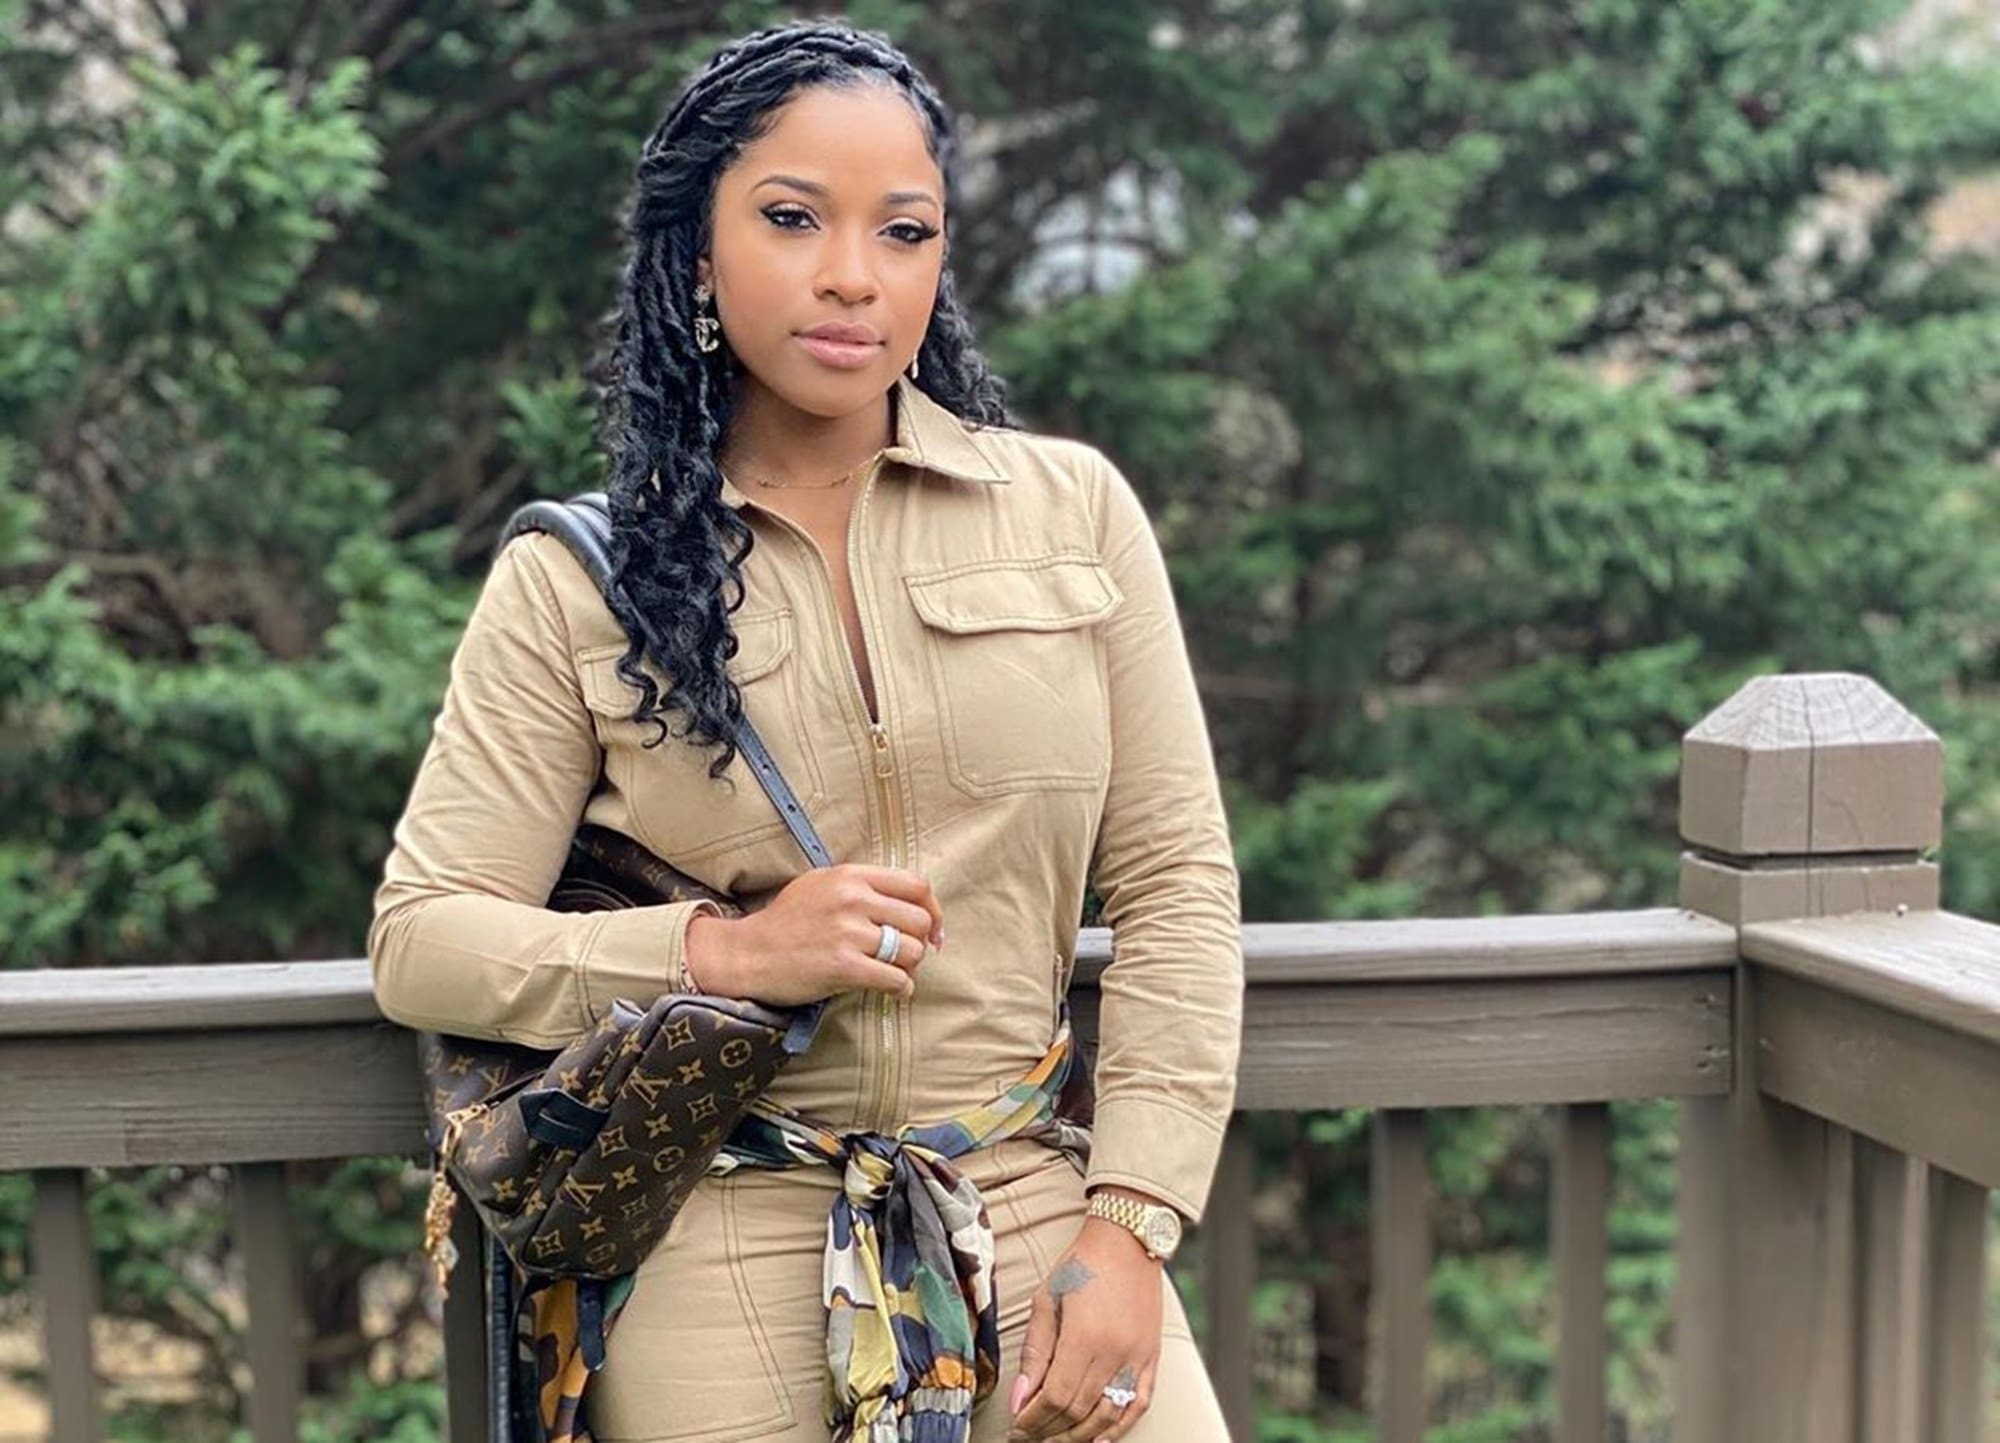 Toya Johnson's Mood On Her Patio Is Her Every Fan's Dream - Check Out Her Latest Pics